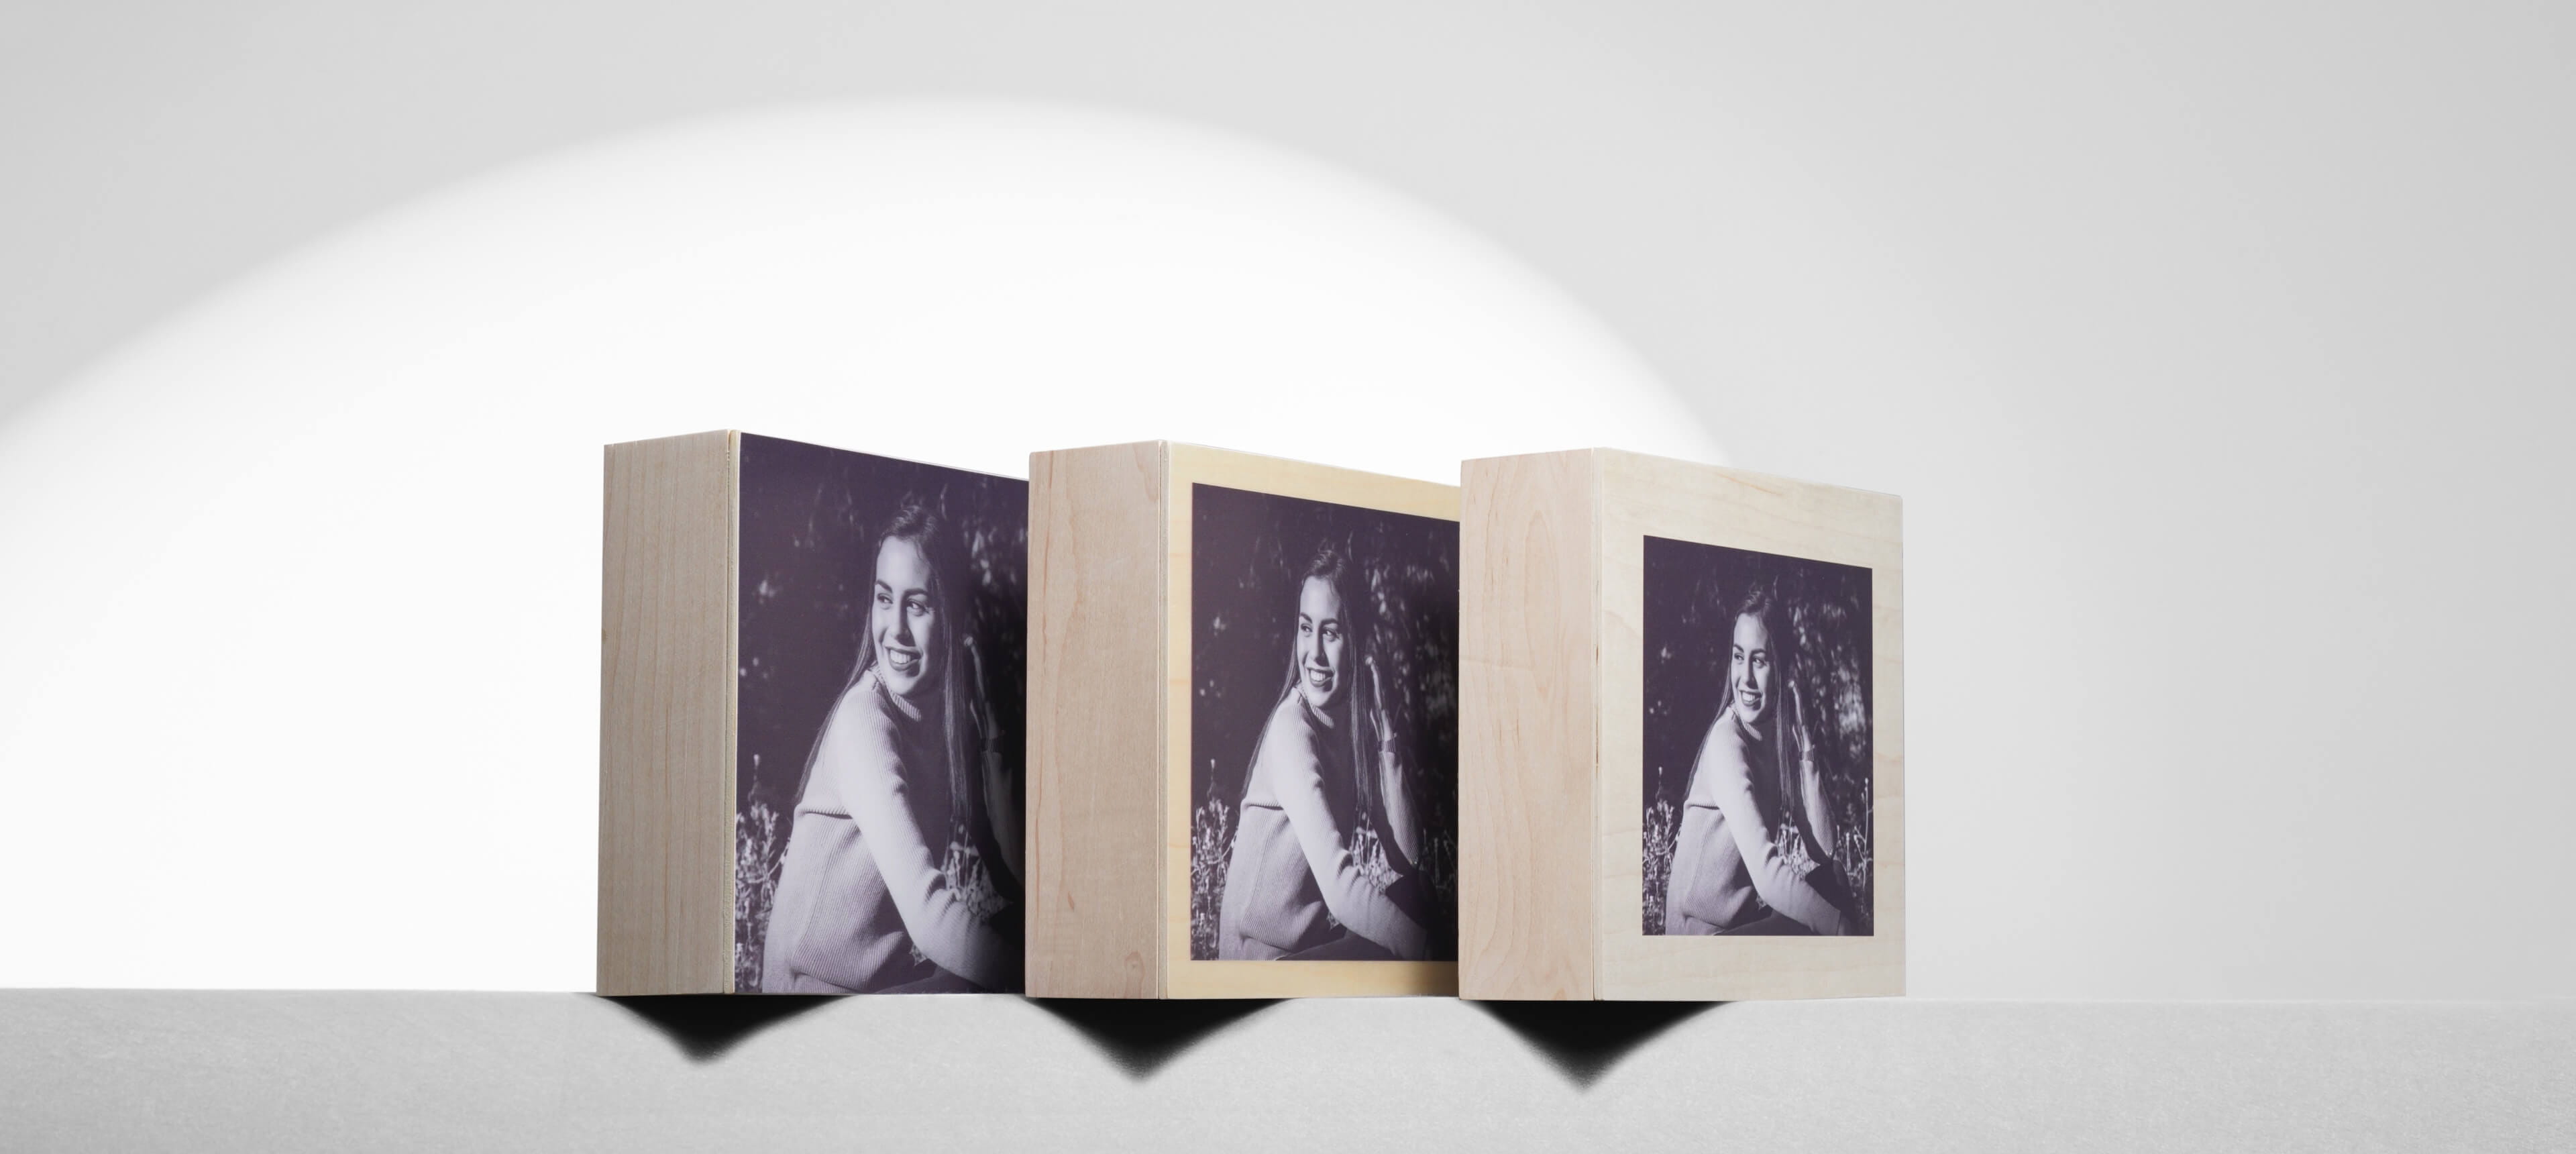 three wood boxes sitting next to each other with the same photo of a girl in three different border options